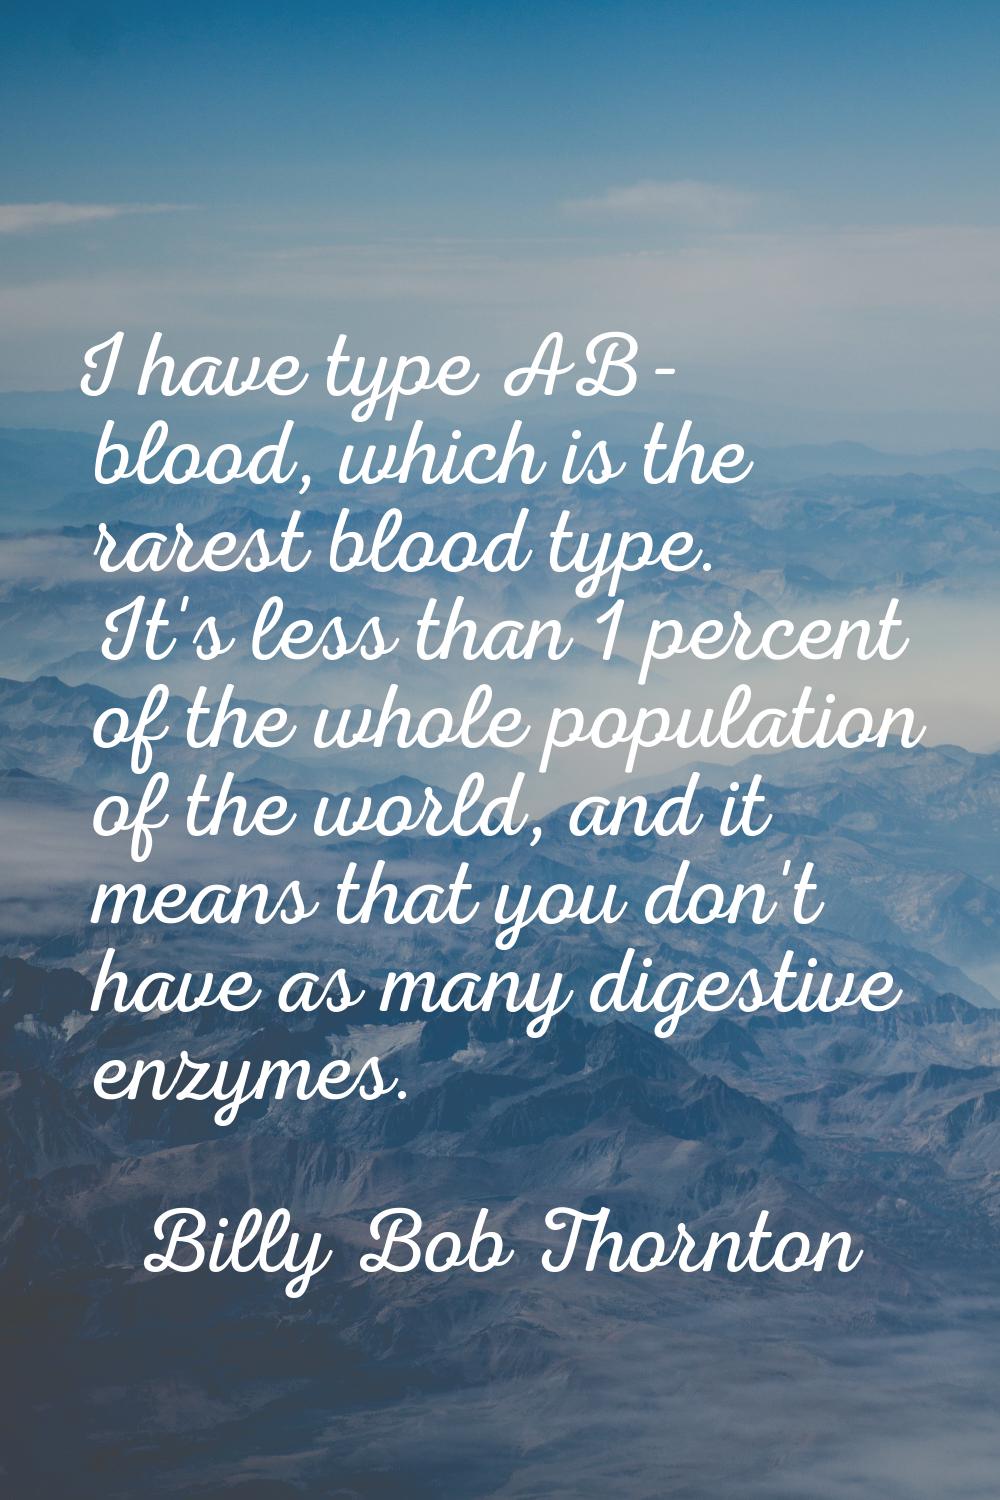 I have type AB- blood, which is the rarest blood type. It's less than 1 percent of the whole popula